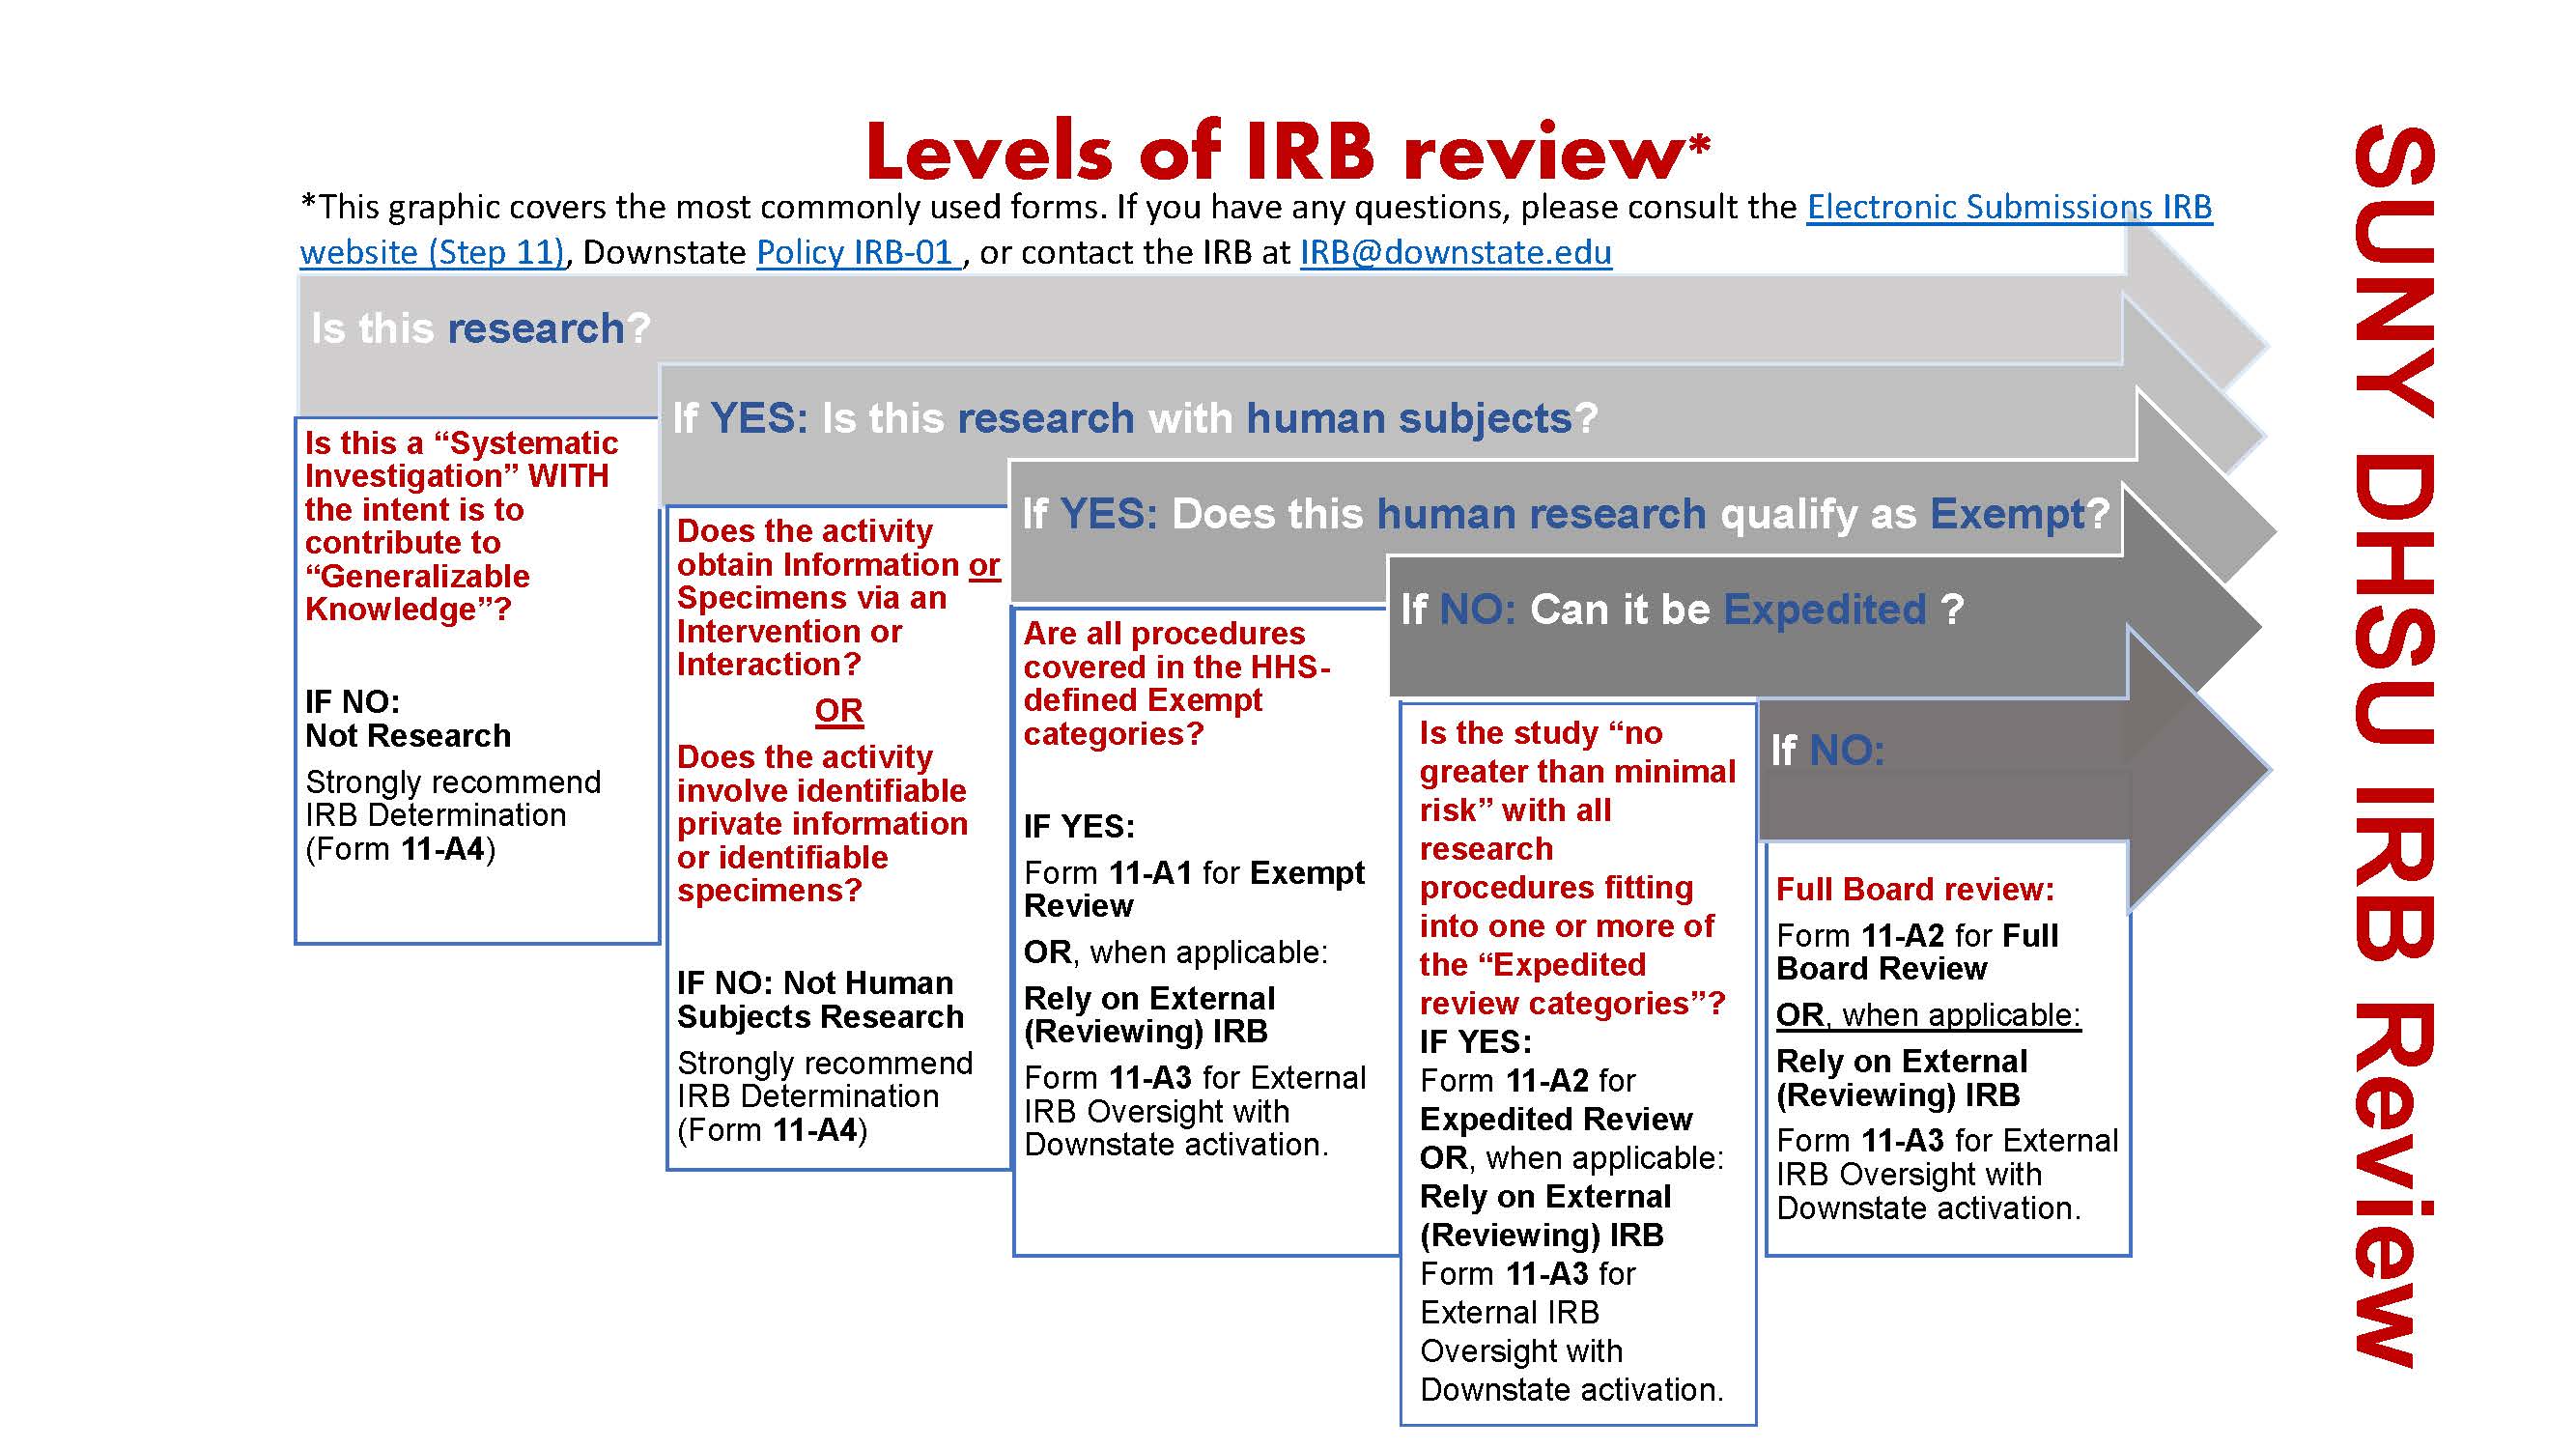 Levels of IRB Review